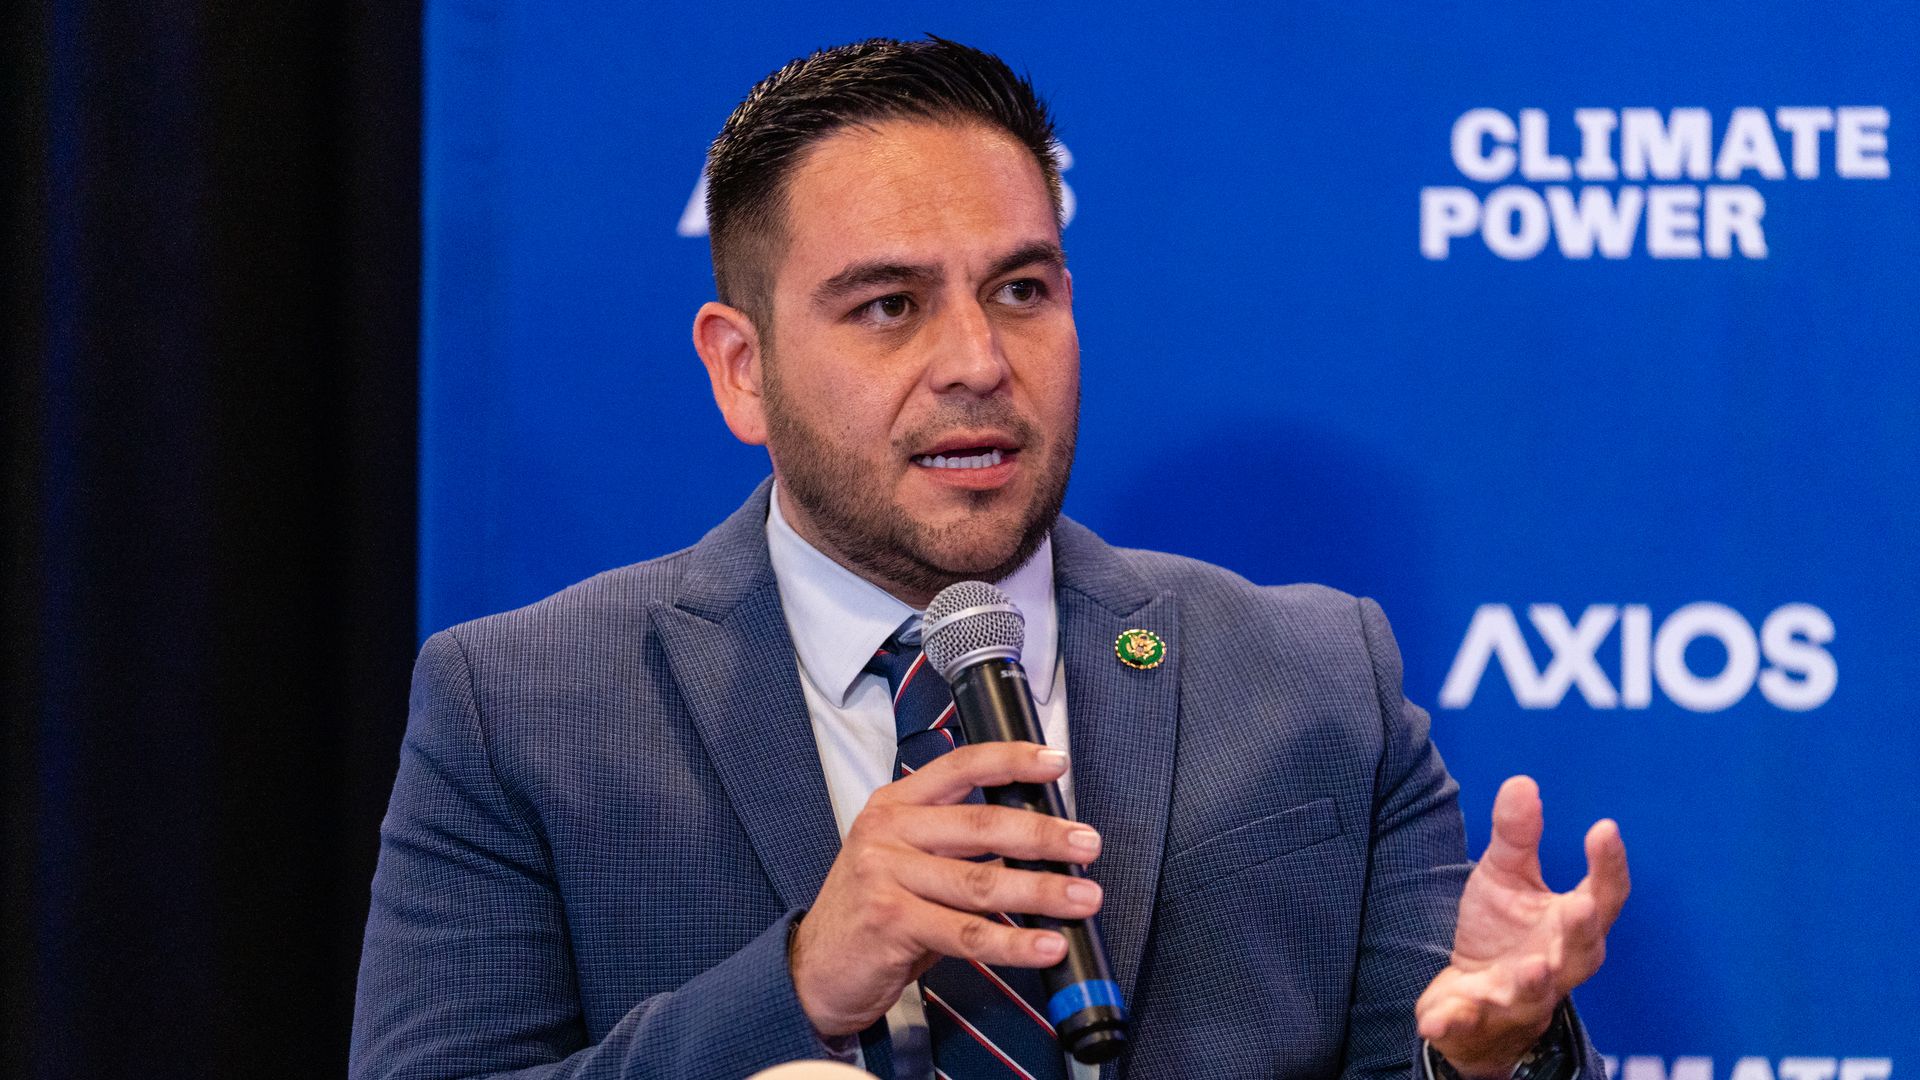 U.S. Rep. Gabe Vasquez (D-N.M.) speaks at an Axios Latino event in Washington on climate change..